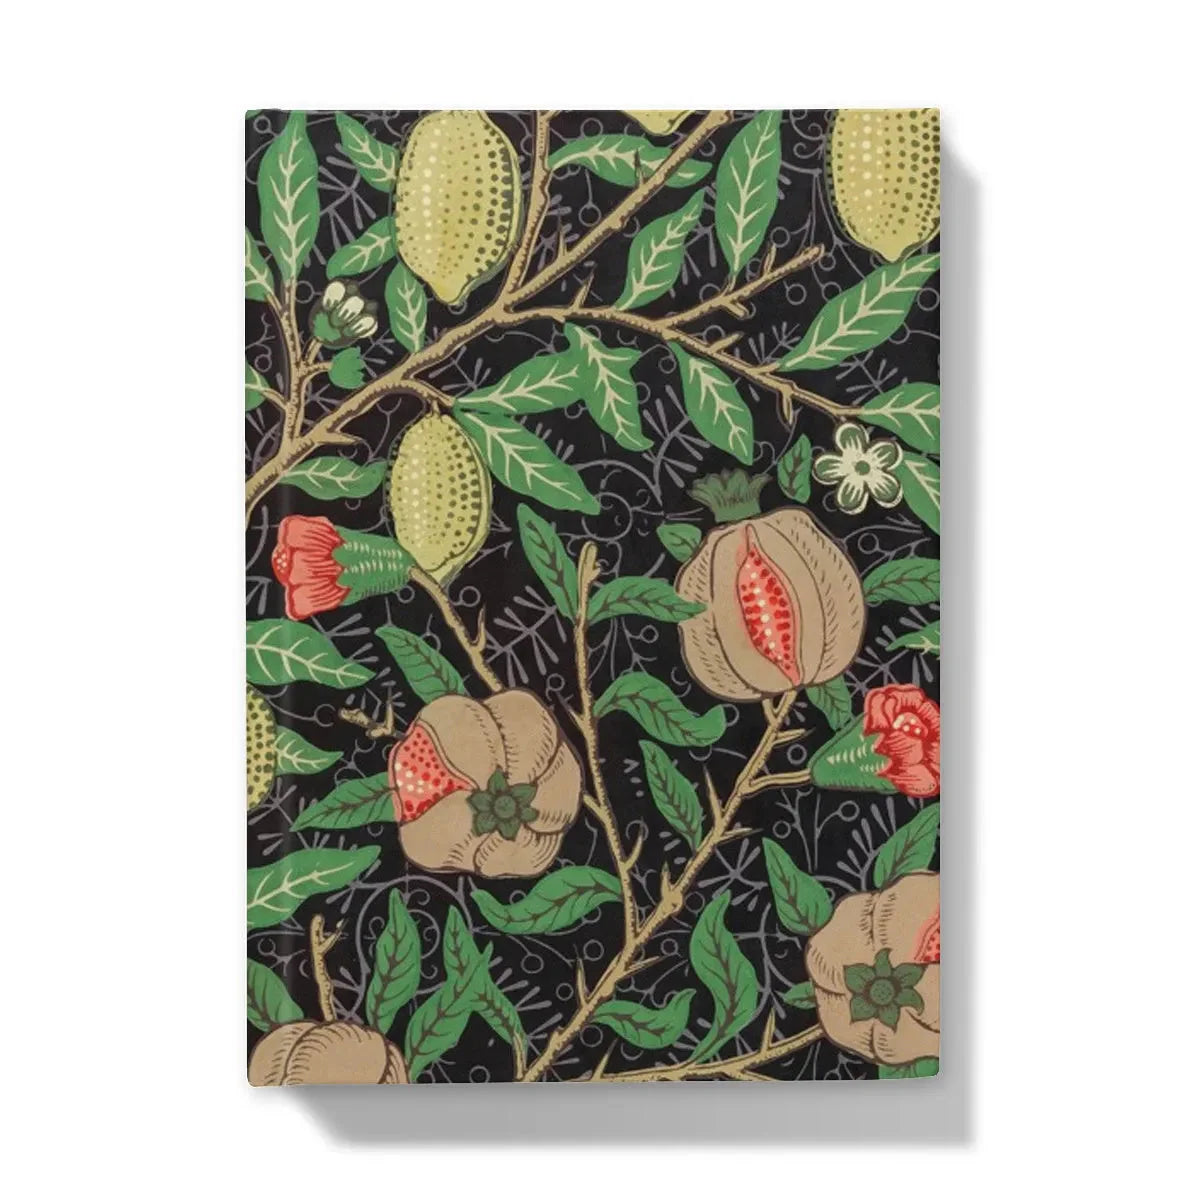 Four Fruits Too By William Morris Hardback Journal - 5’x7’ / 5’ x 7’ - Lined Paper - Notebooks & Notepads